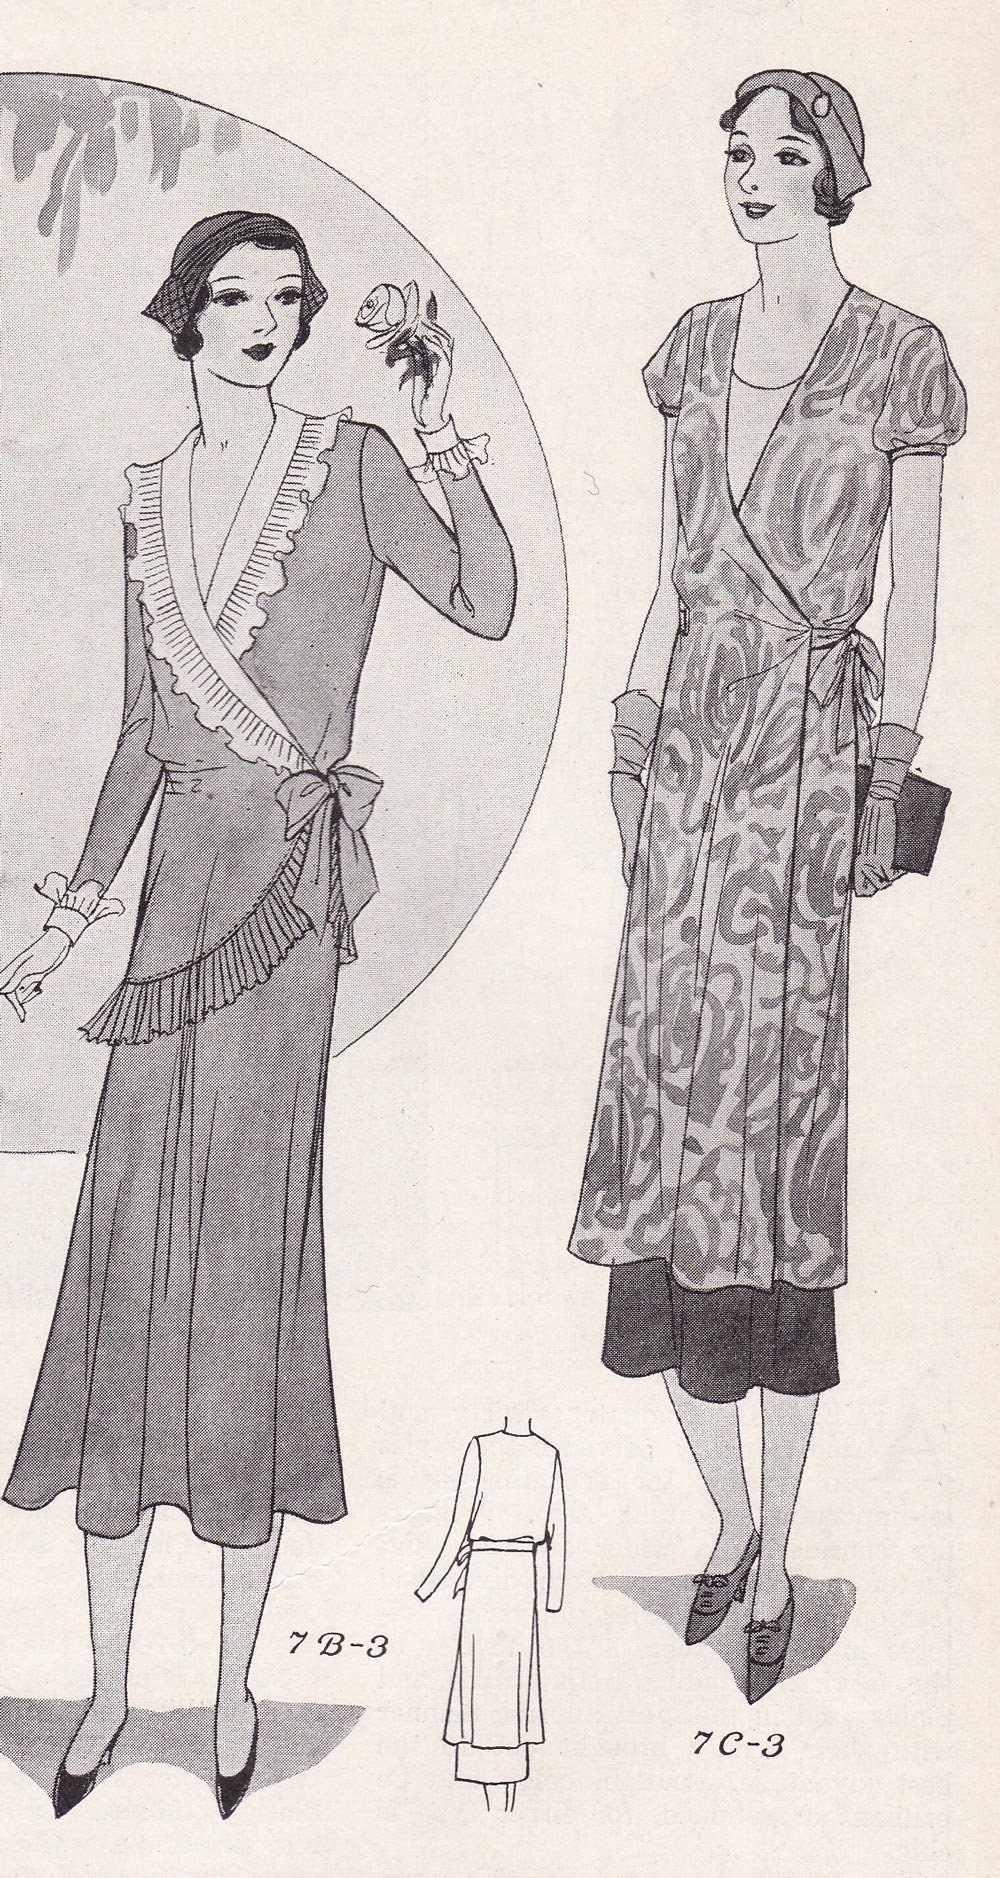 PDF Reproduction 1931 March Woman's Institute Fashion - Etsy